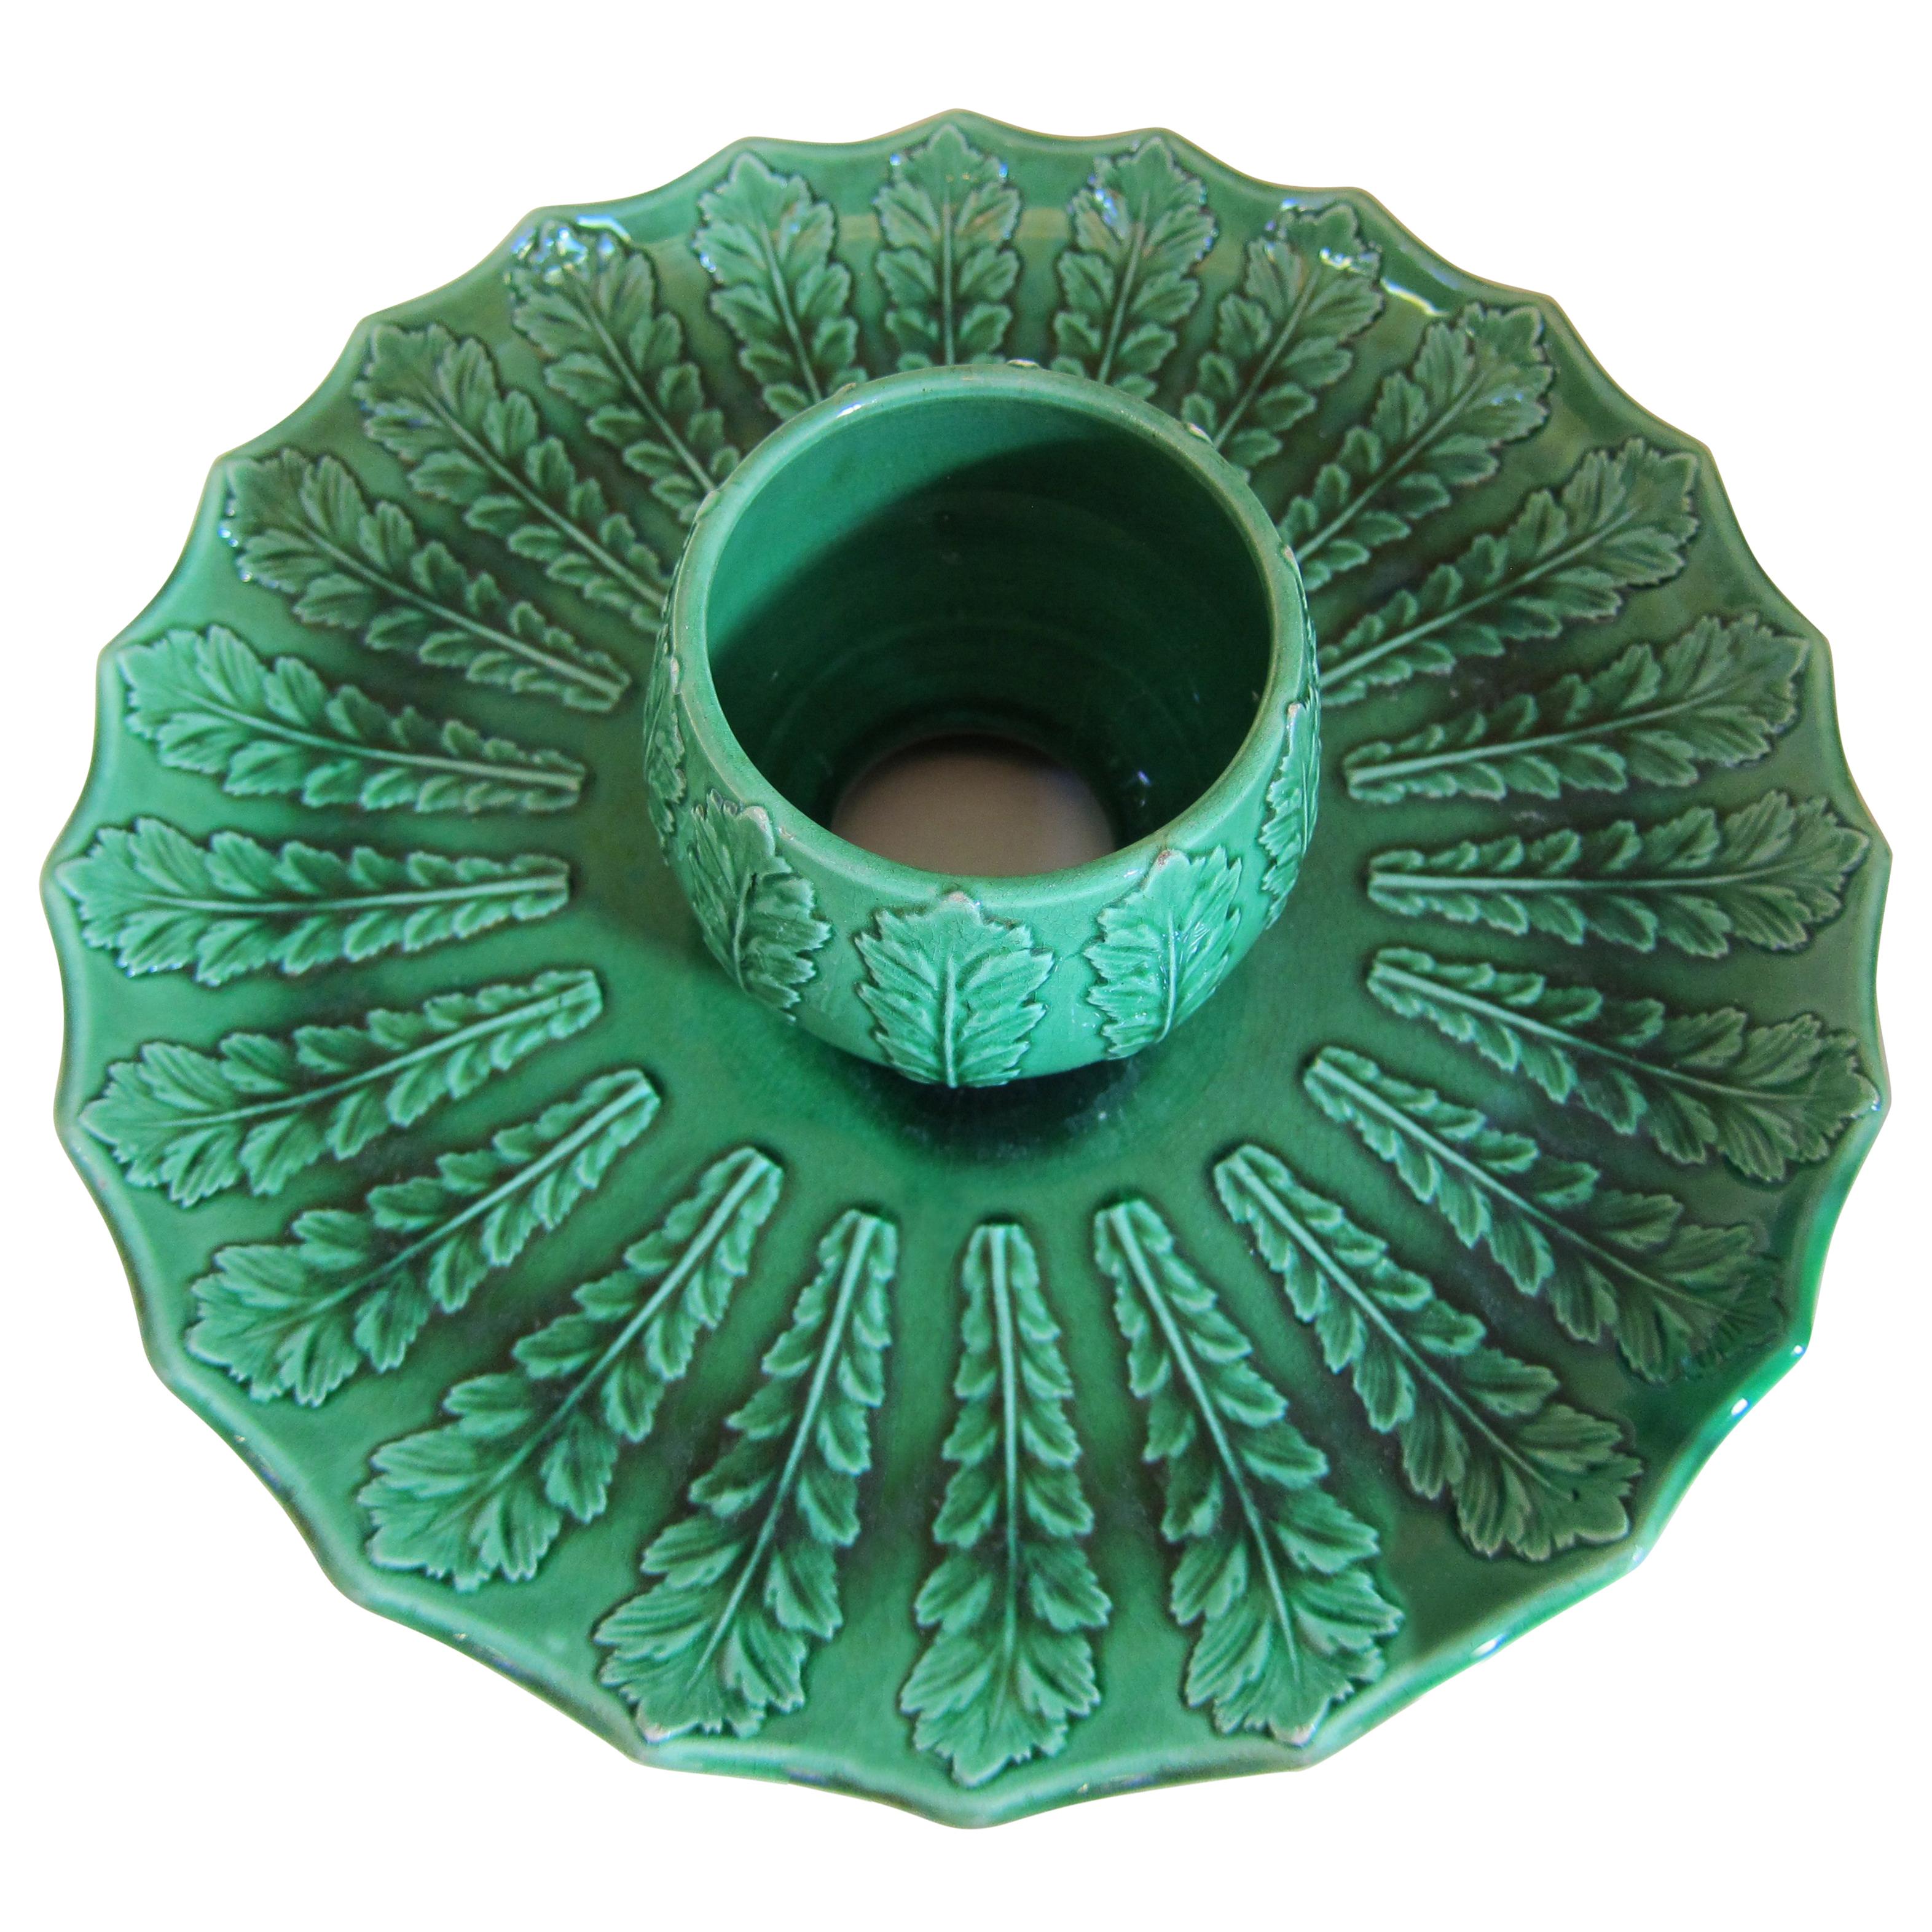 English Ceramic Green Glaze Pineapple Fruit Stand Bowl Plate For Sale